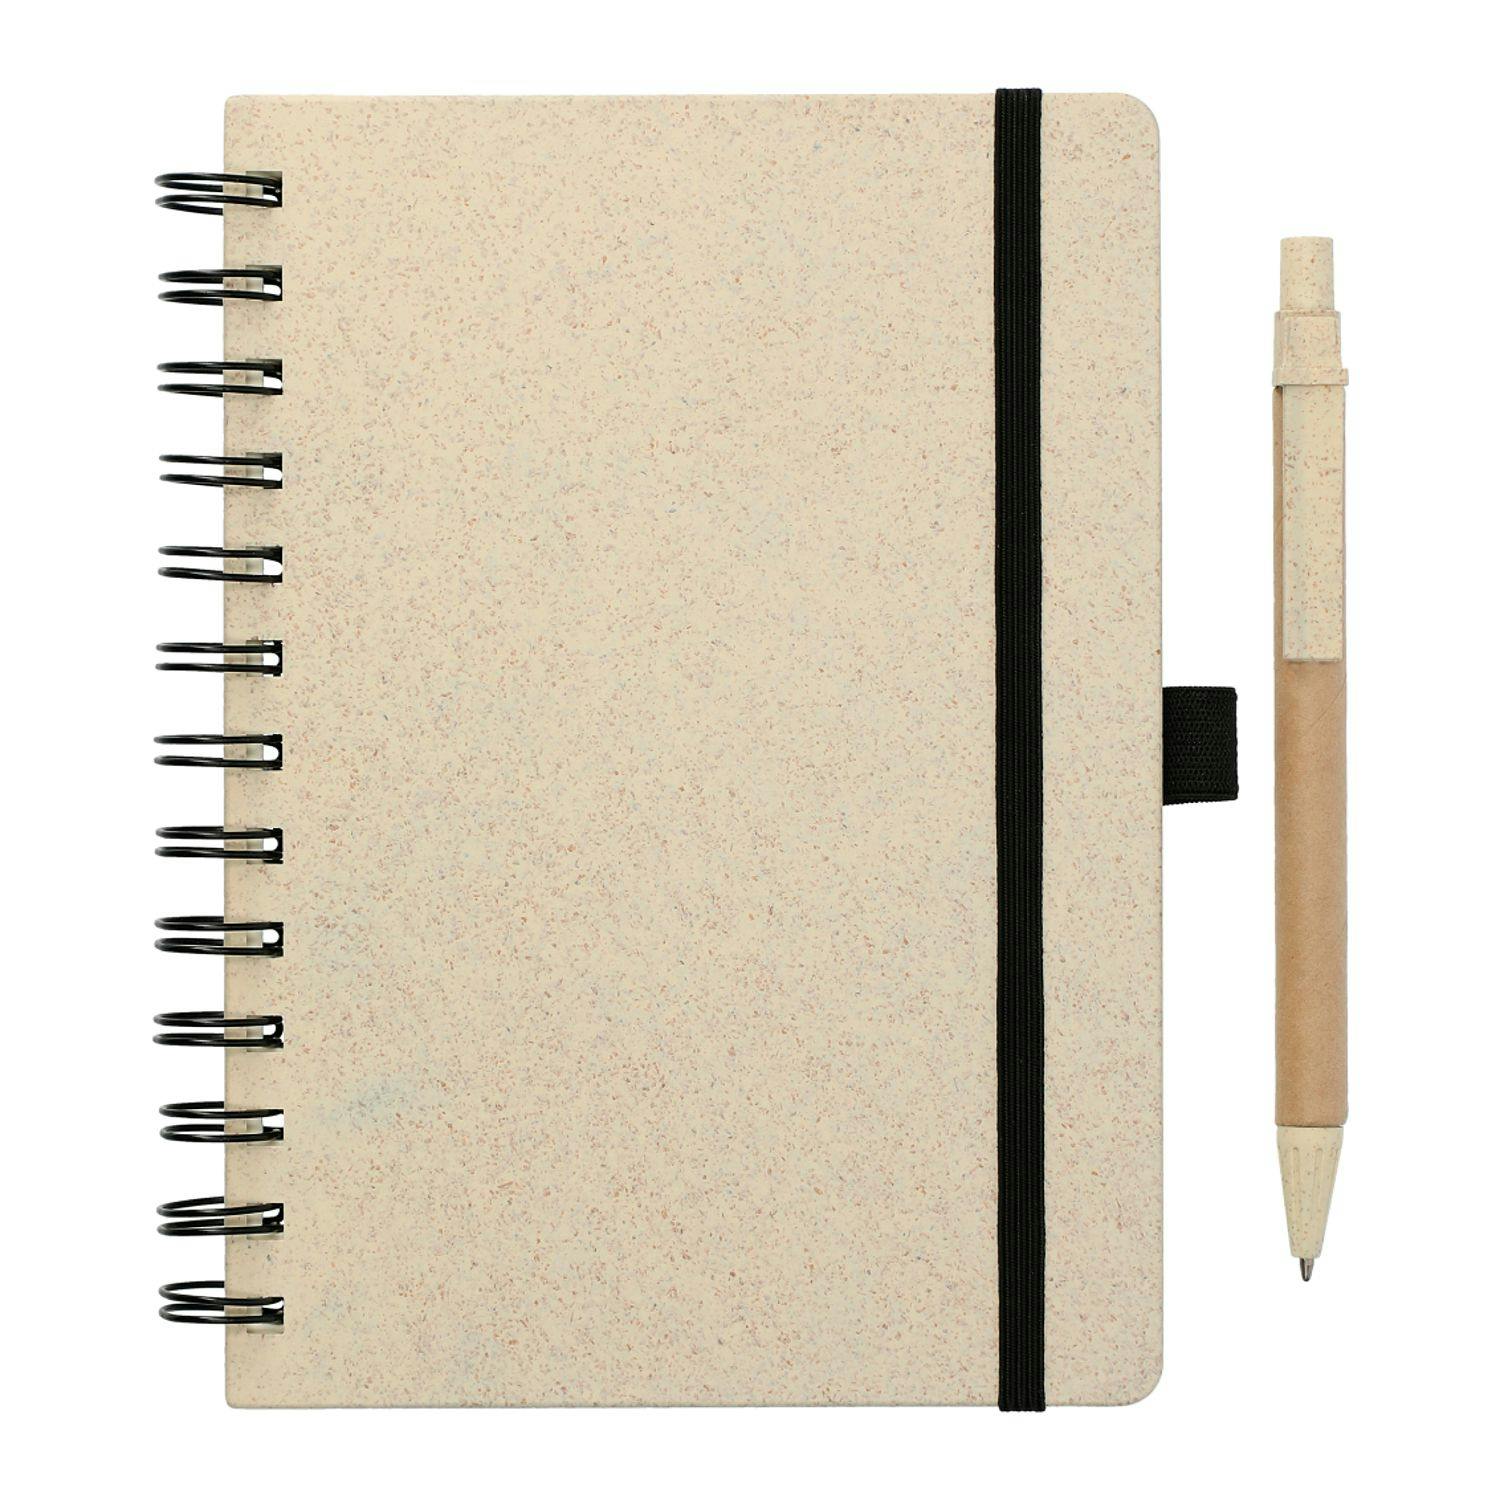 5" x 7" Wheat Straw Notebook With Pen - additional Image 1